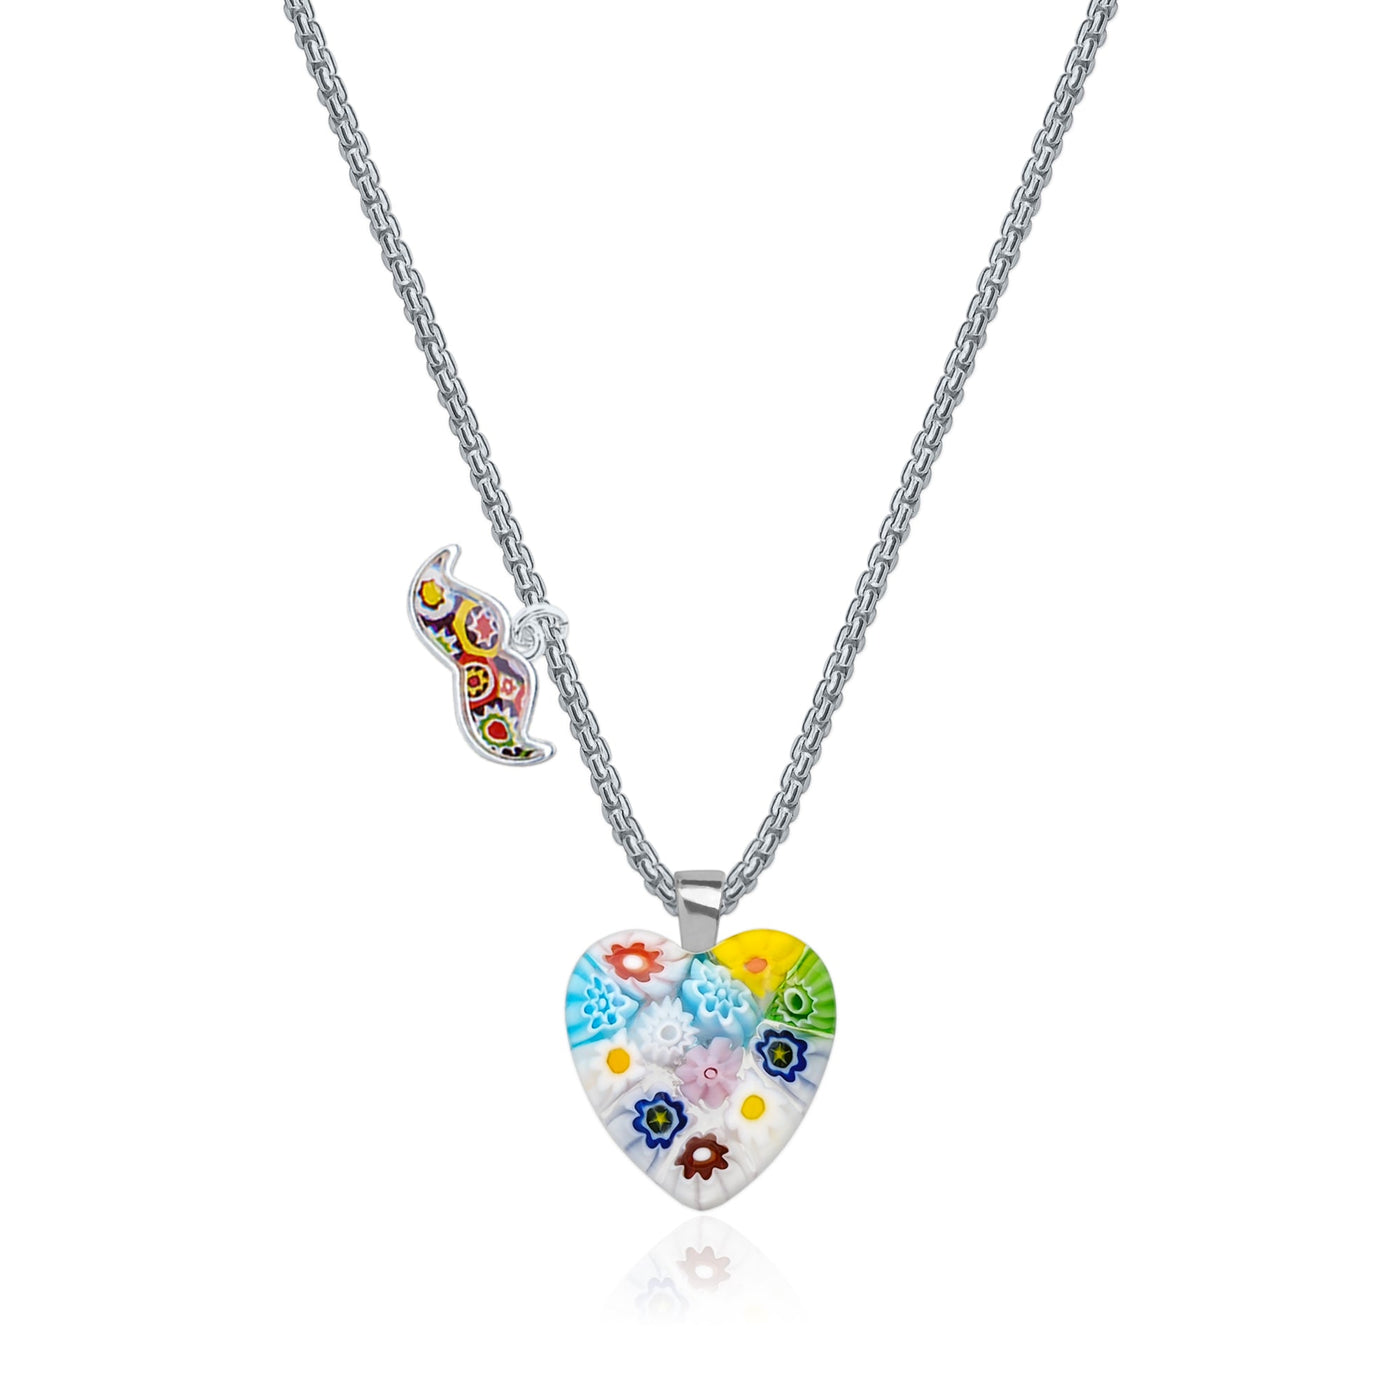 Flowers in Bloom Heart Necklace - 1.2mm 925 Sterling Silver - Pendant Necklace